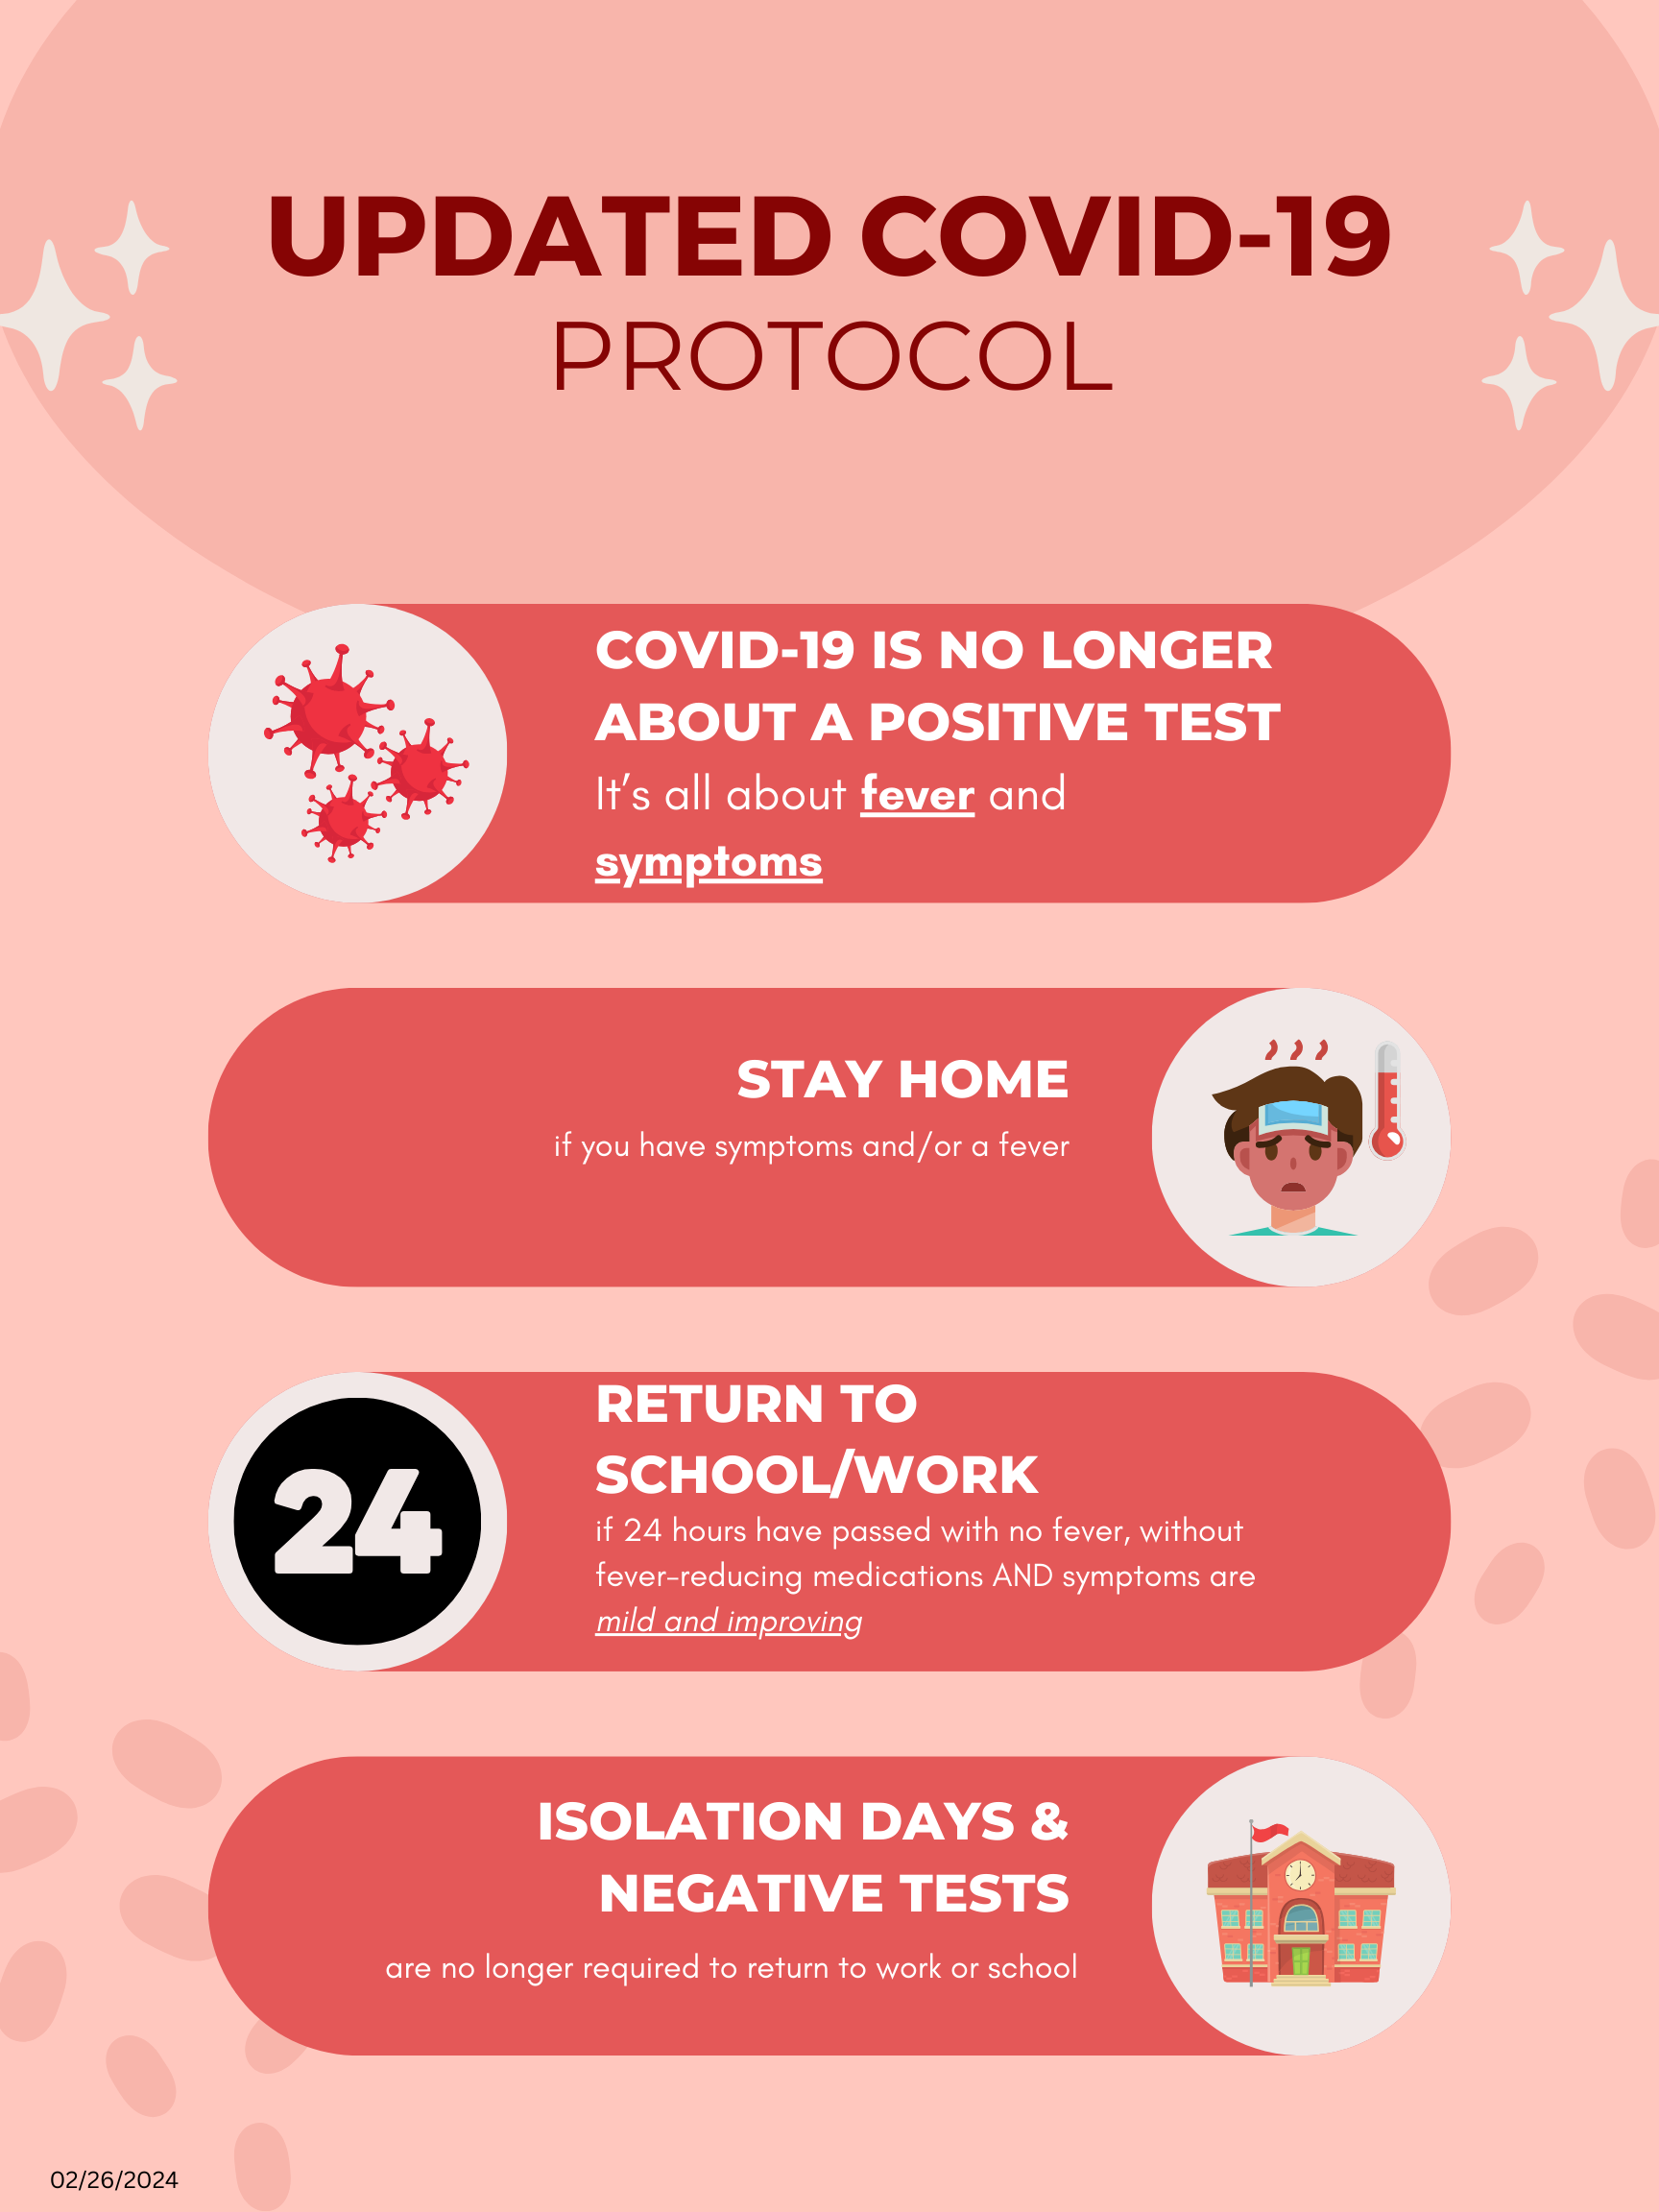 Updated COVID-19 Protocol